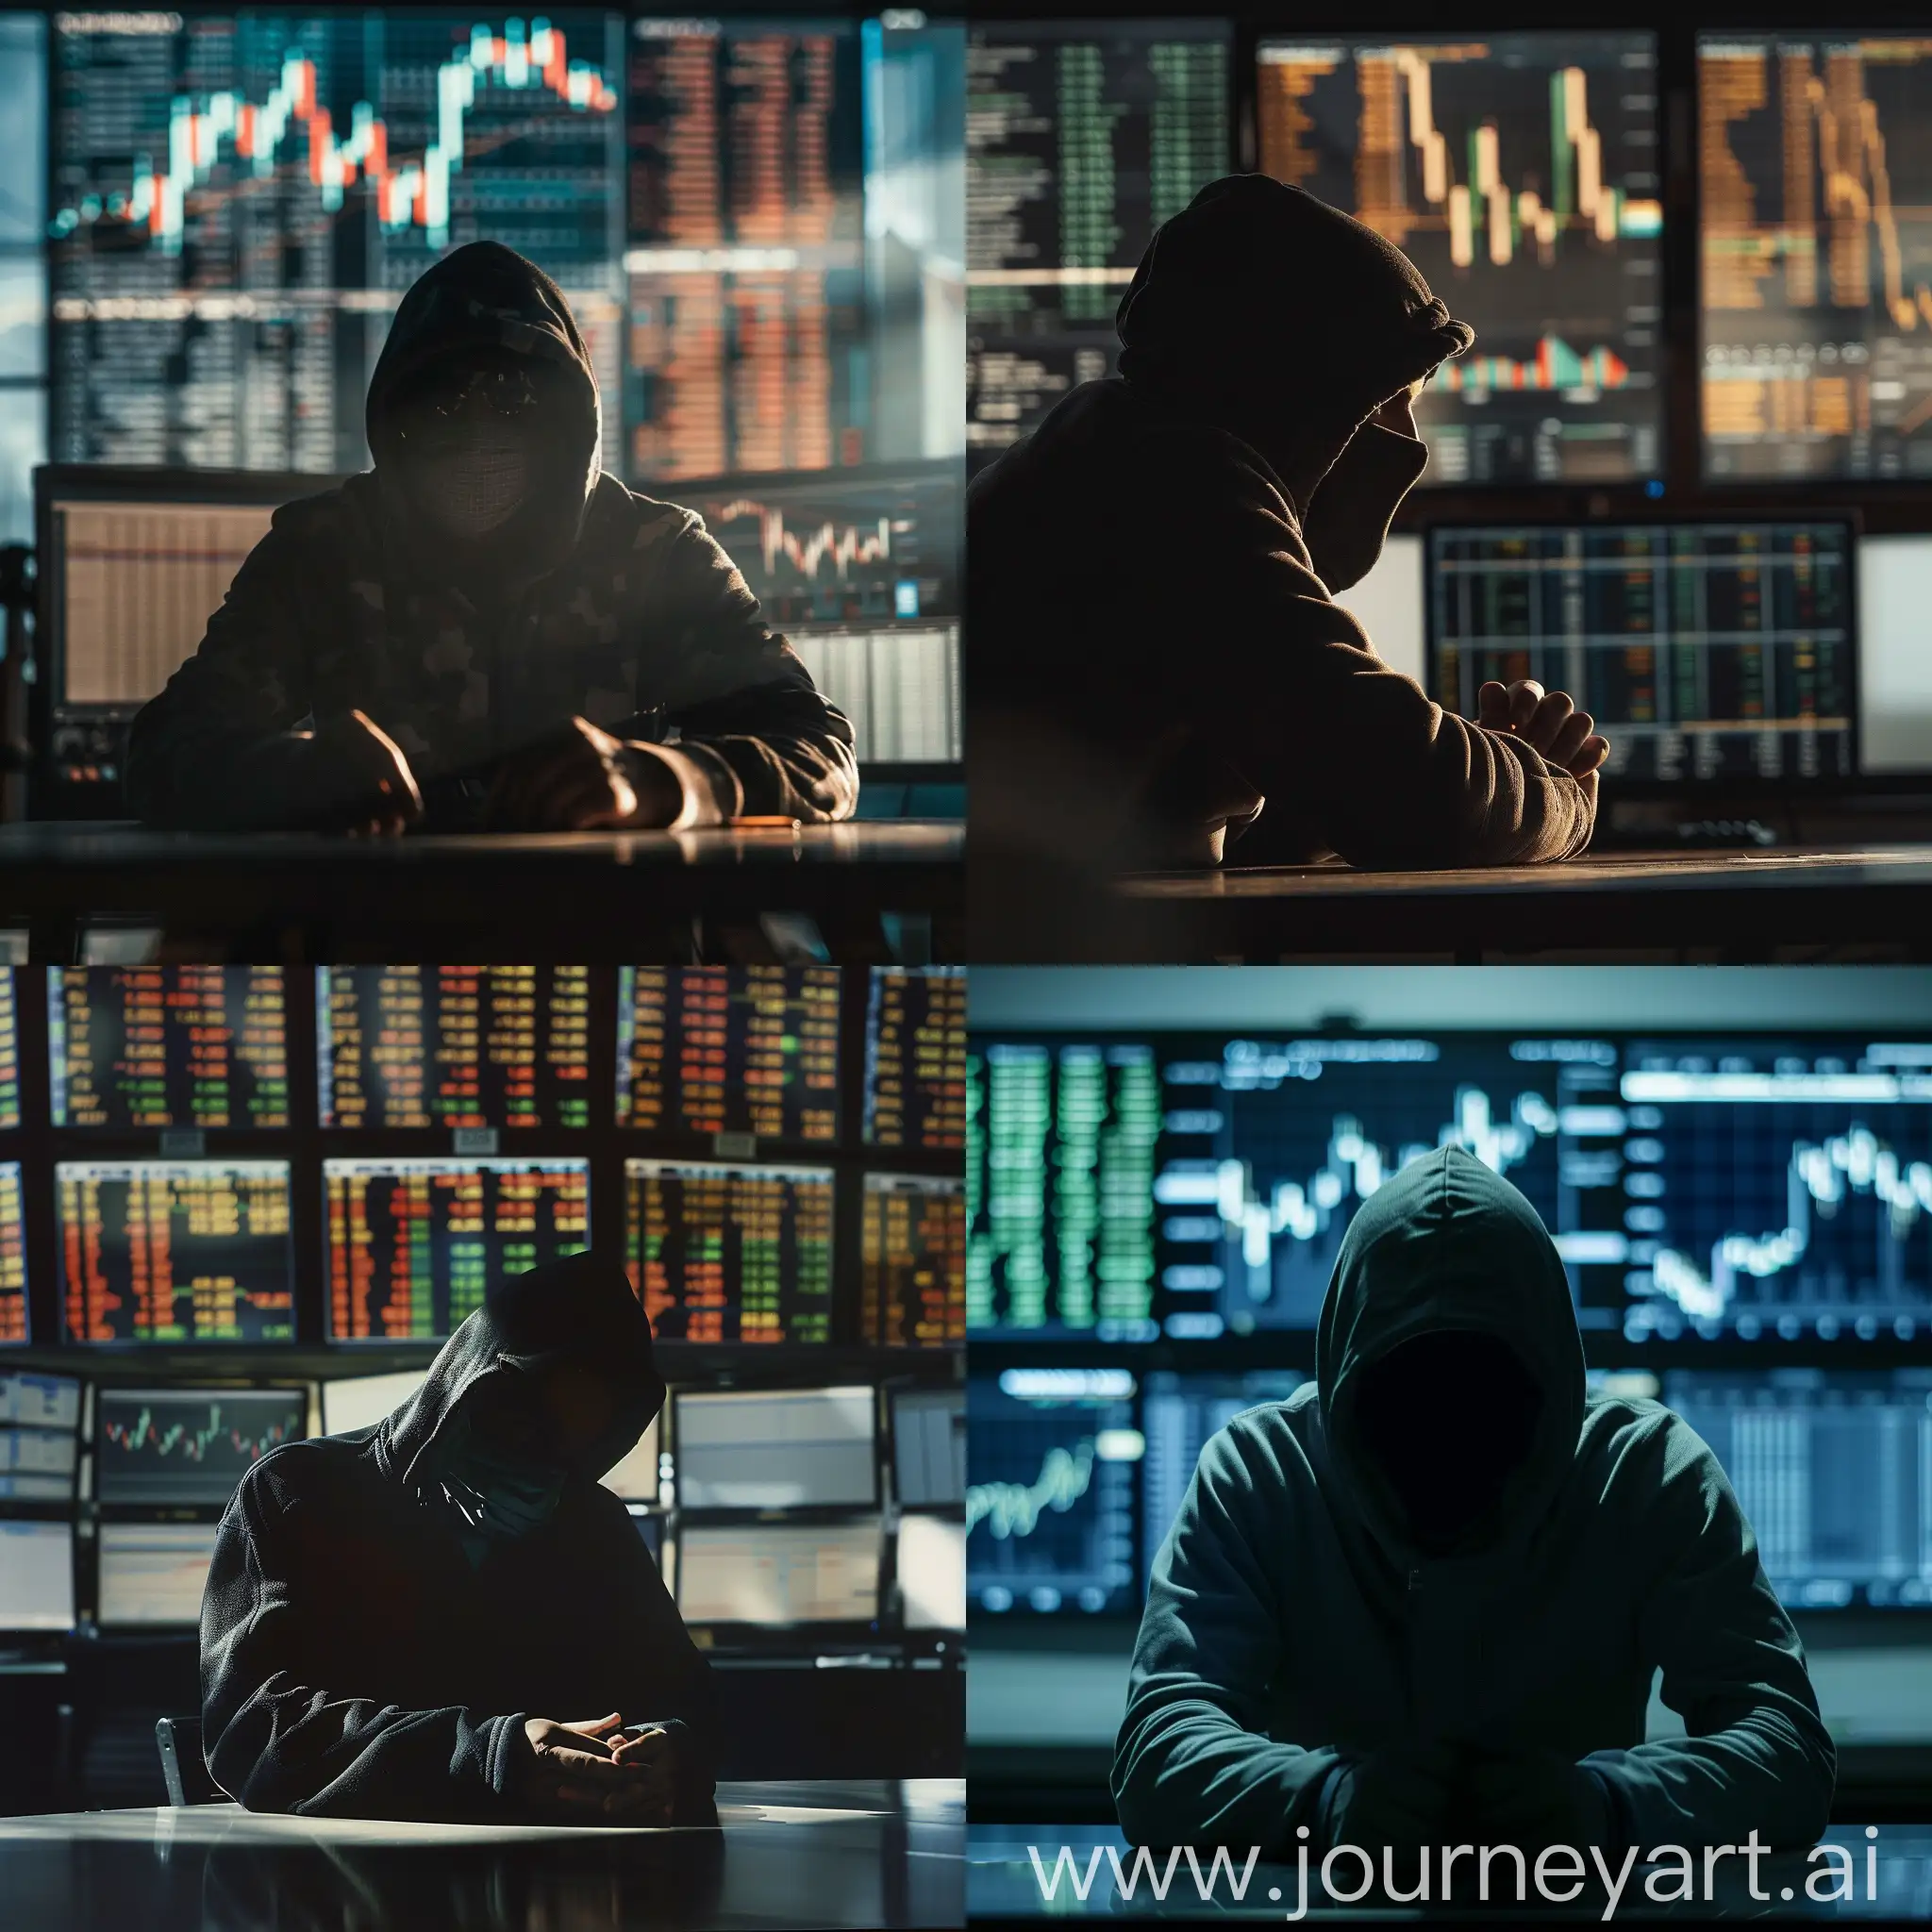 in the foreground, a man is sitting at a table in the shade, his face is not visible under the hood. behind him are barely visible monitors with stock market charts